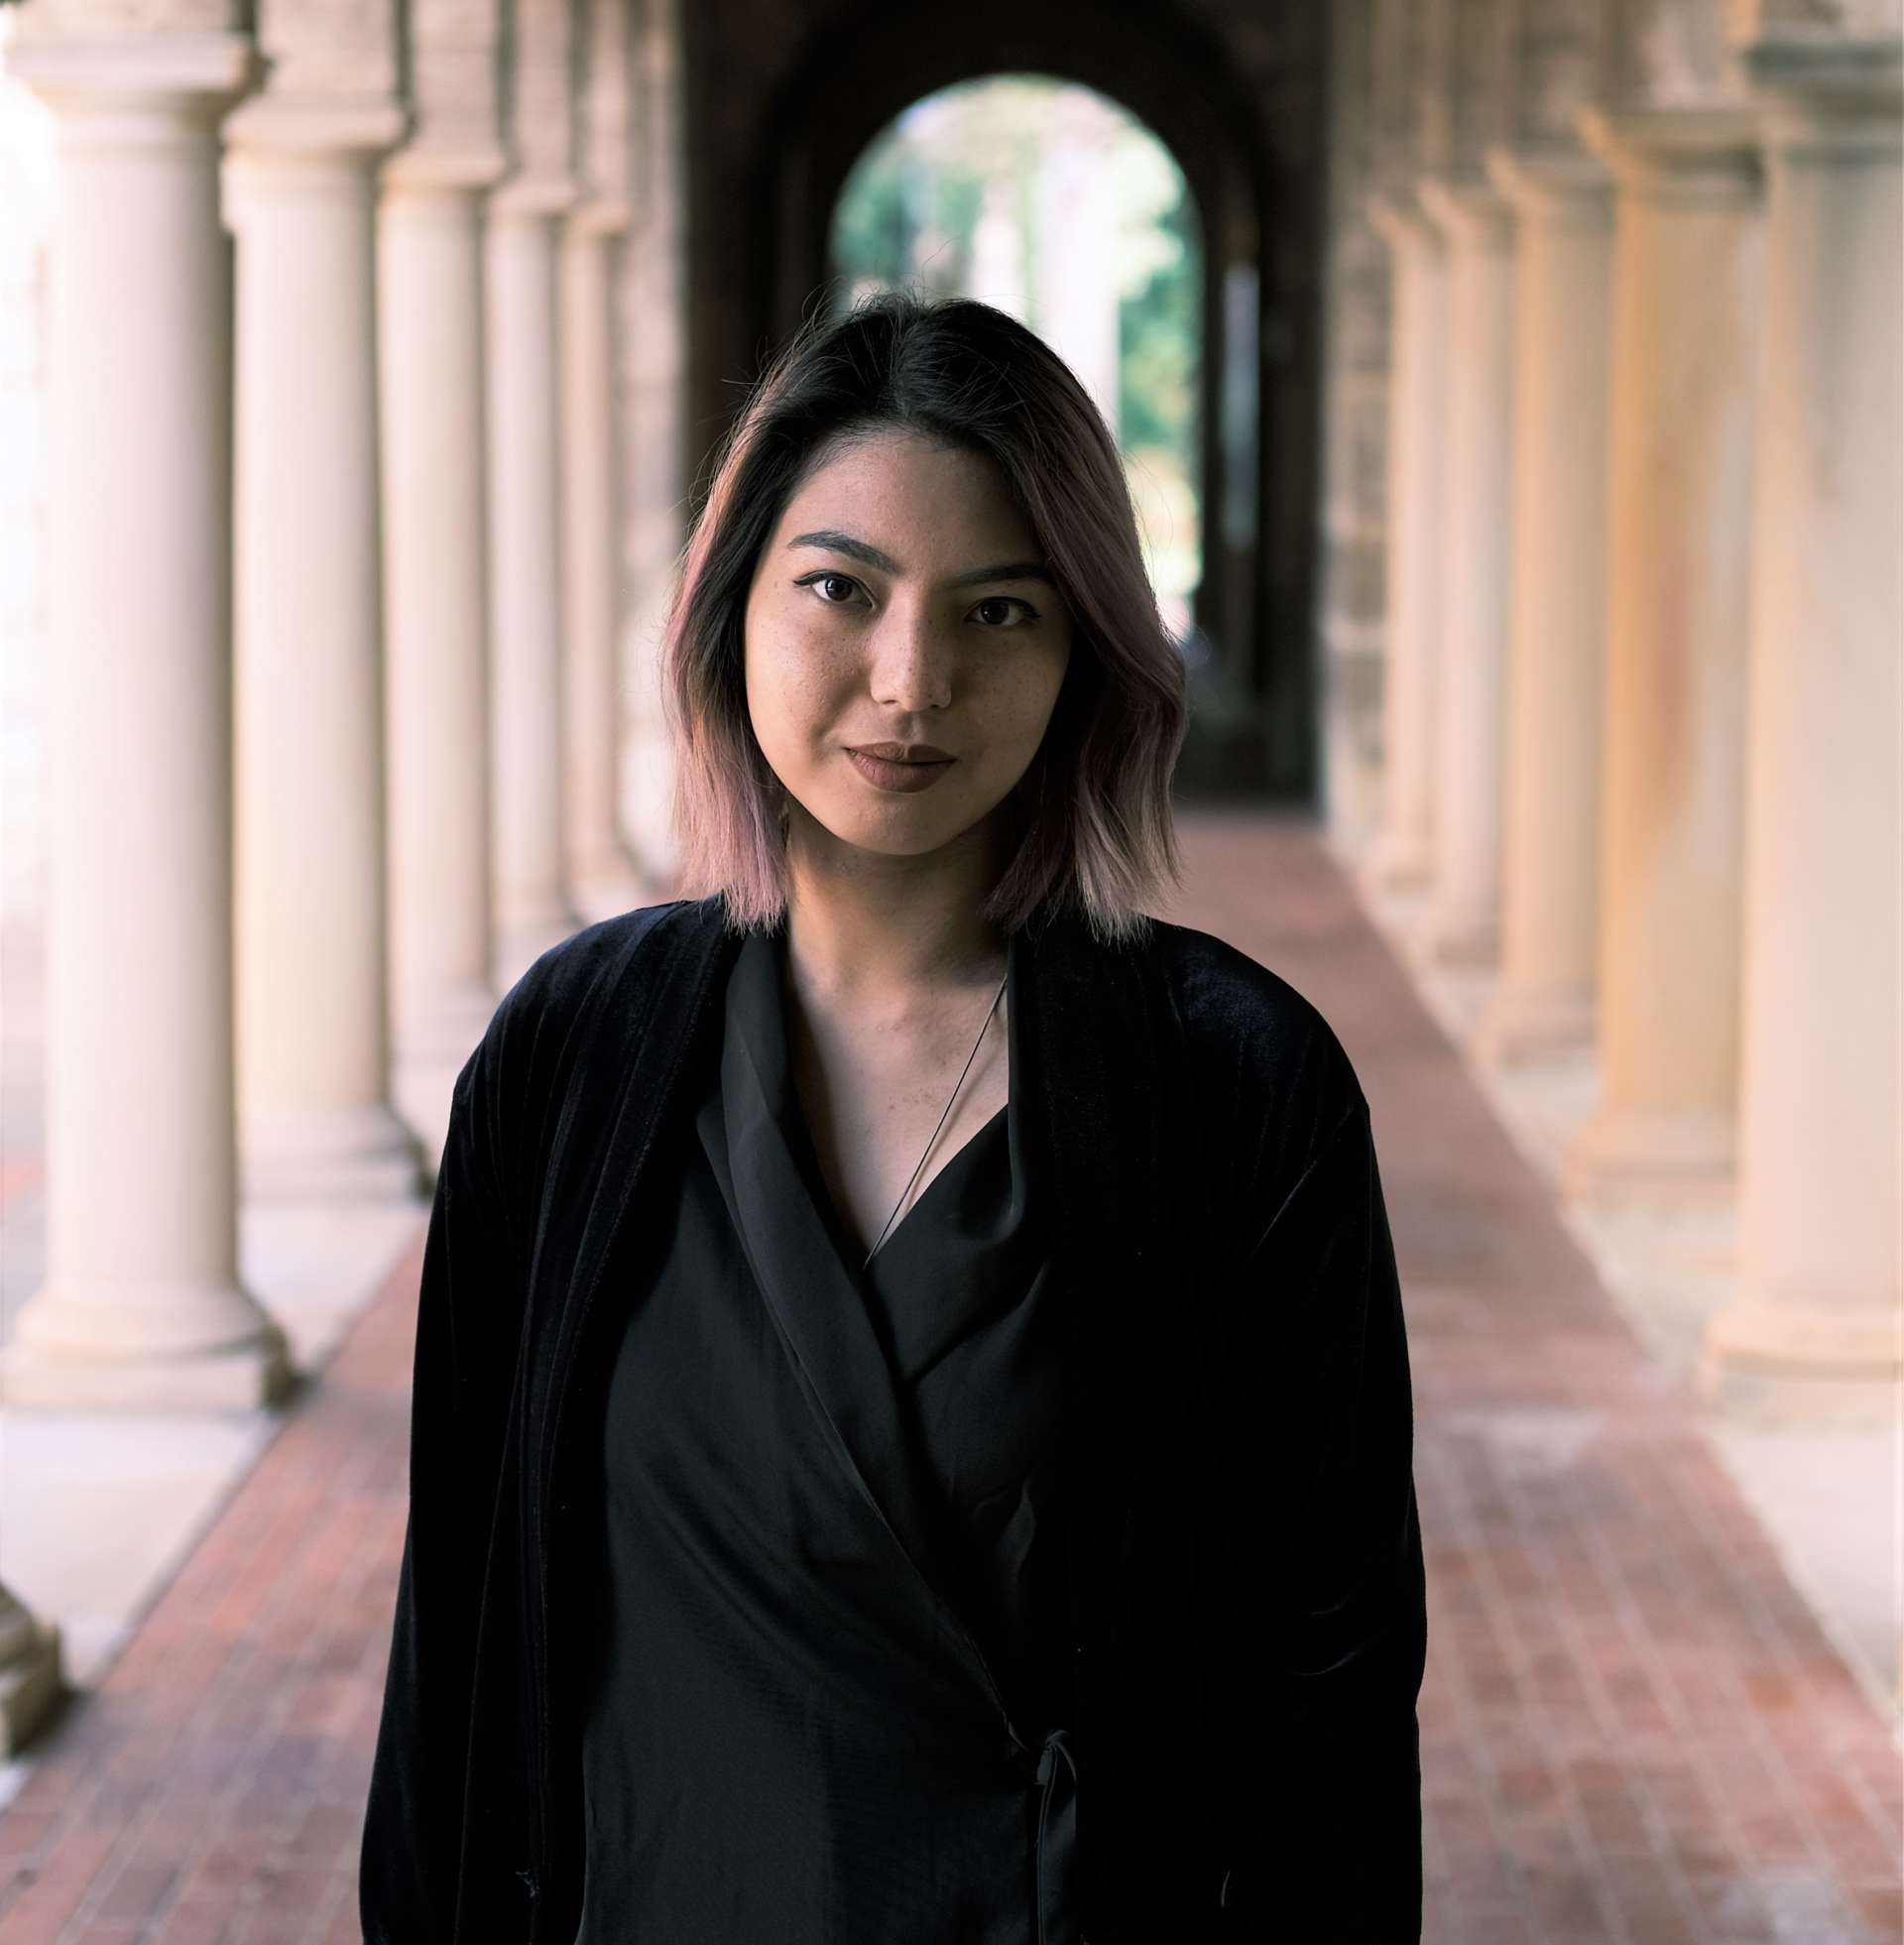 A headshot of the writer Prema Arasu. Prema is standing in the middle of a long outdoor hallway, framed by lines of stone columns. She has long dark shoulder-length hair that has hints of blonde and pink at the ends. Prema is wearing a black top and black cardigan. She looks to the camera with a closed-mouth smile.